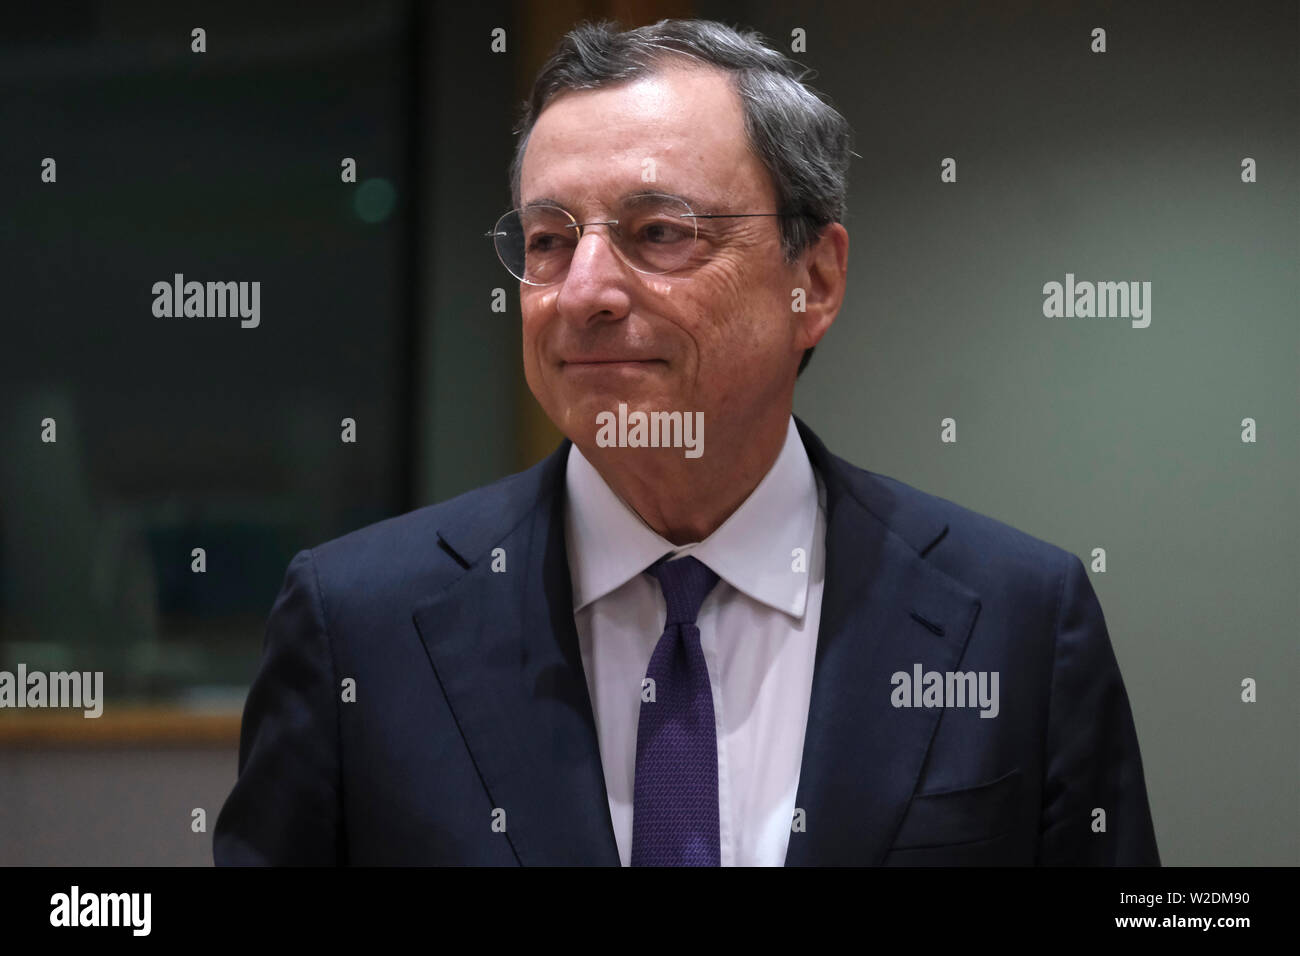 Brussels, Belgium. 8th July 2019. President of the European Central Bank, Mario Draghi  during the Eurogroup Finance Ministers' meeting. Credit: ALEXANDROS MICHAILIDIS/Alamy Live News Stock Photo